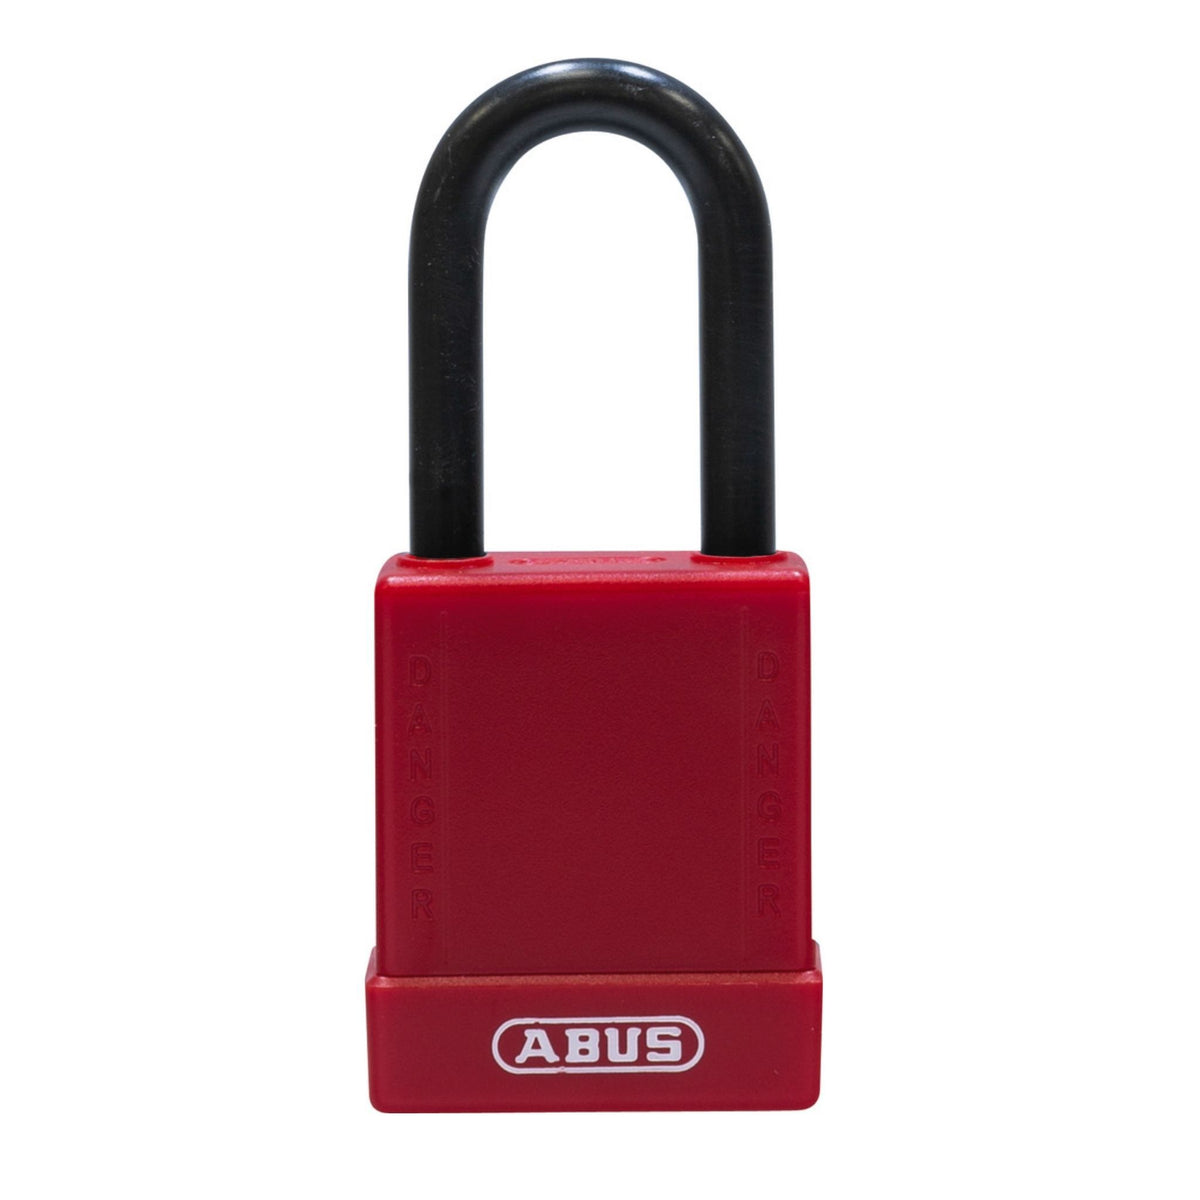 Abus 76PS/40 Red Safety Lock with Steel Shackle Covered by Plastic Sleeve - The Lock Source